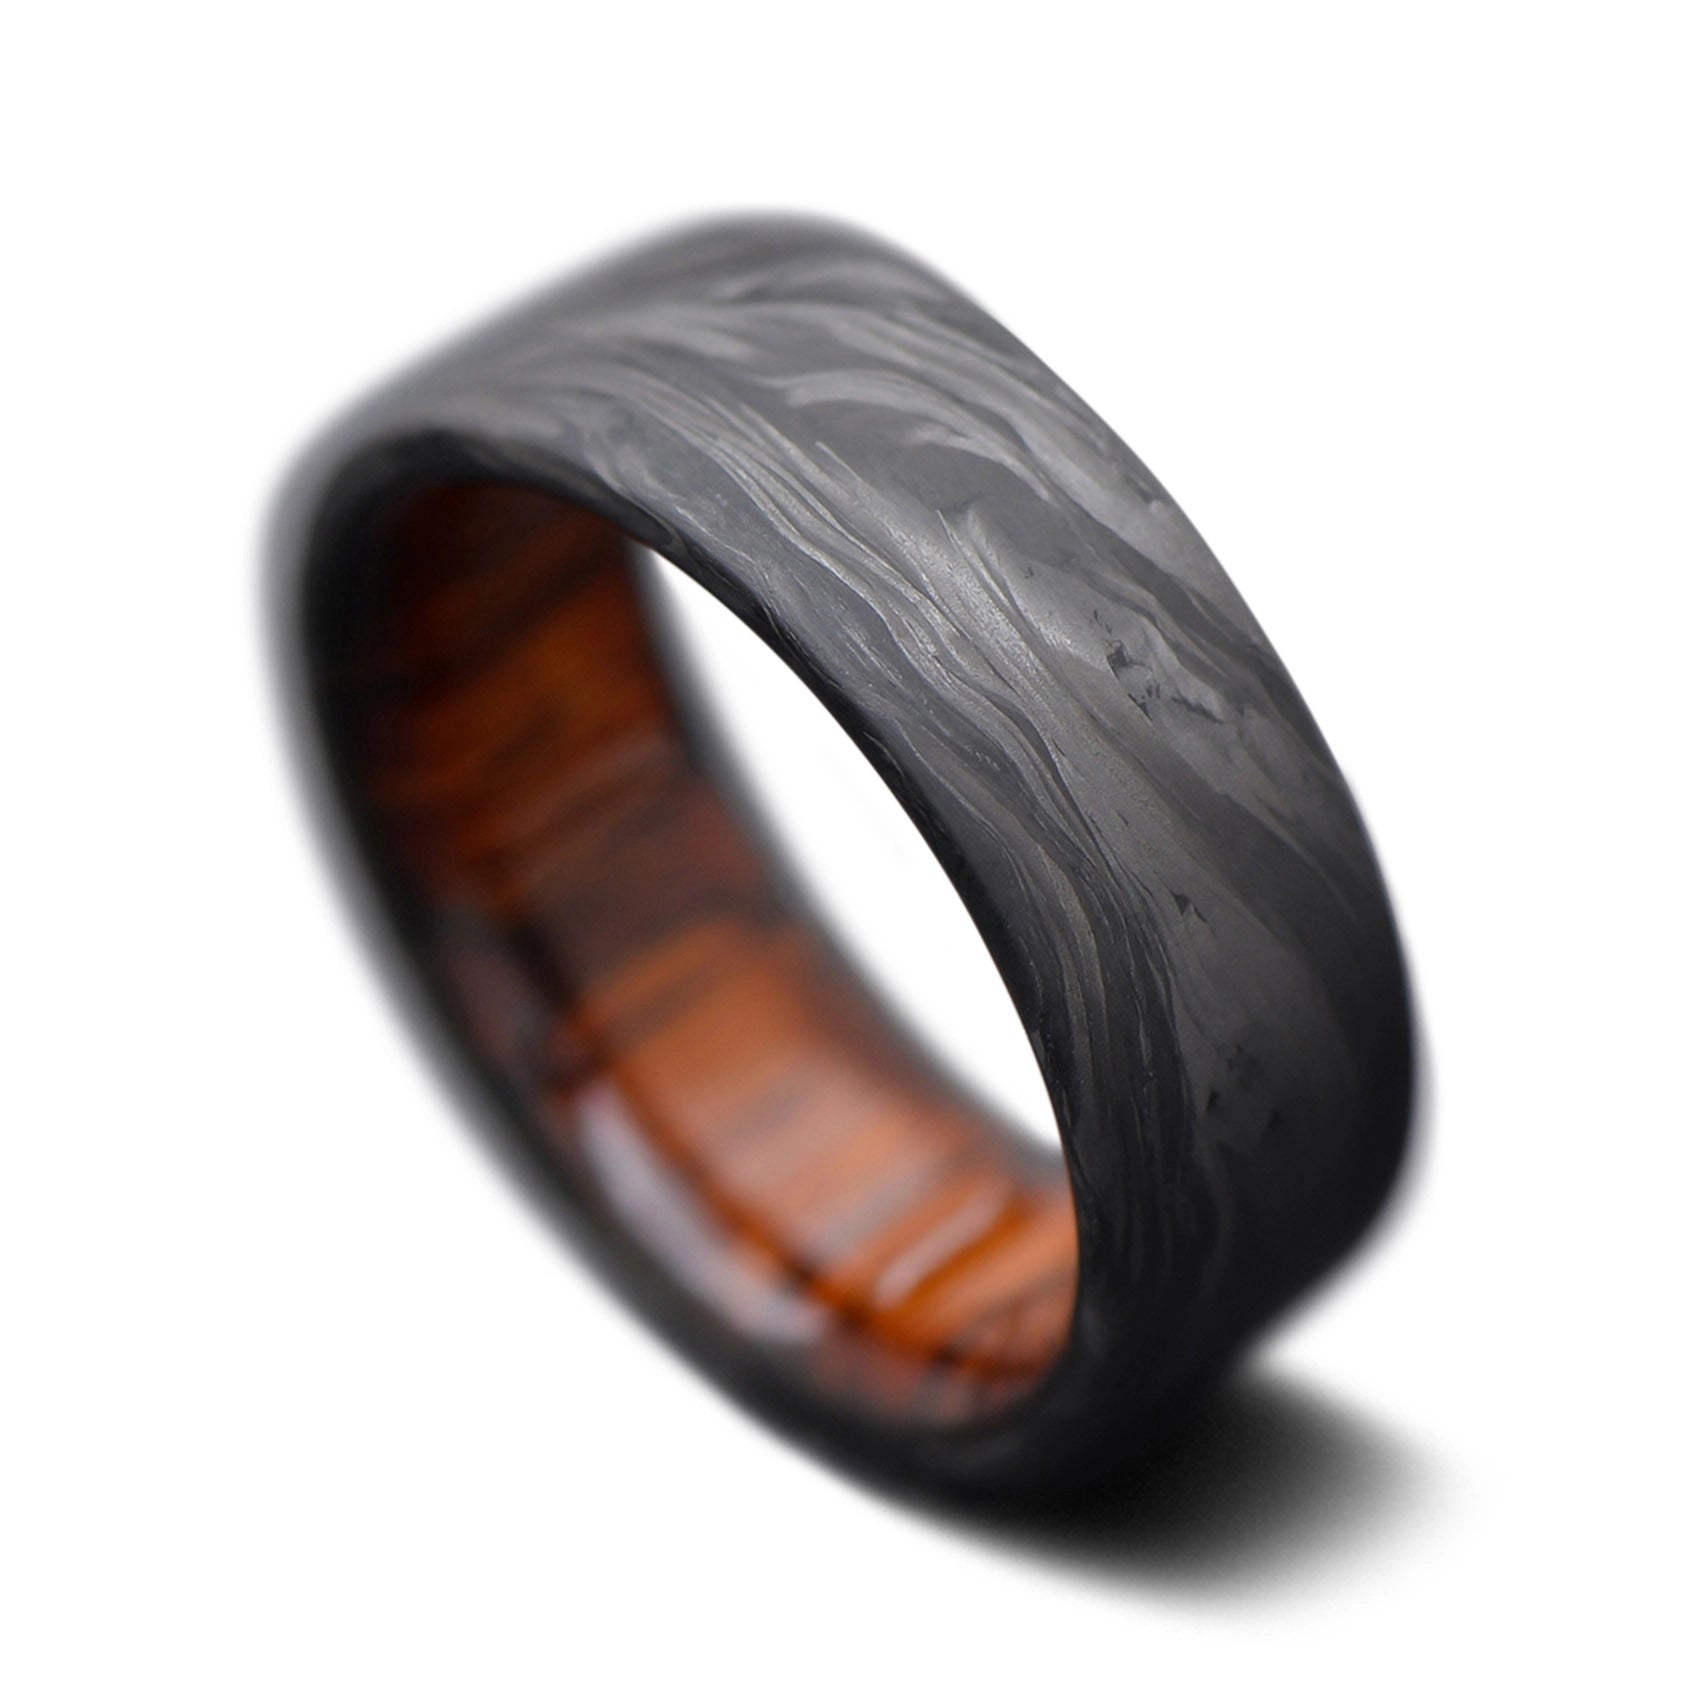 CarbonForged Core Ring with  Teak inner sleeve, 8mm -THE QUEST